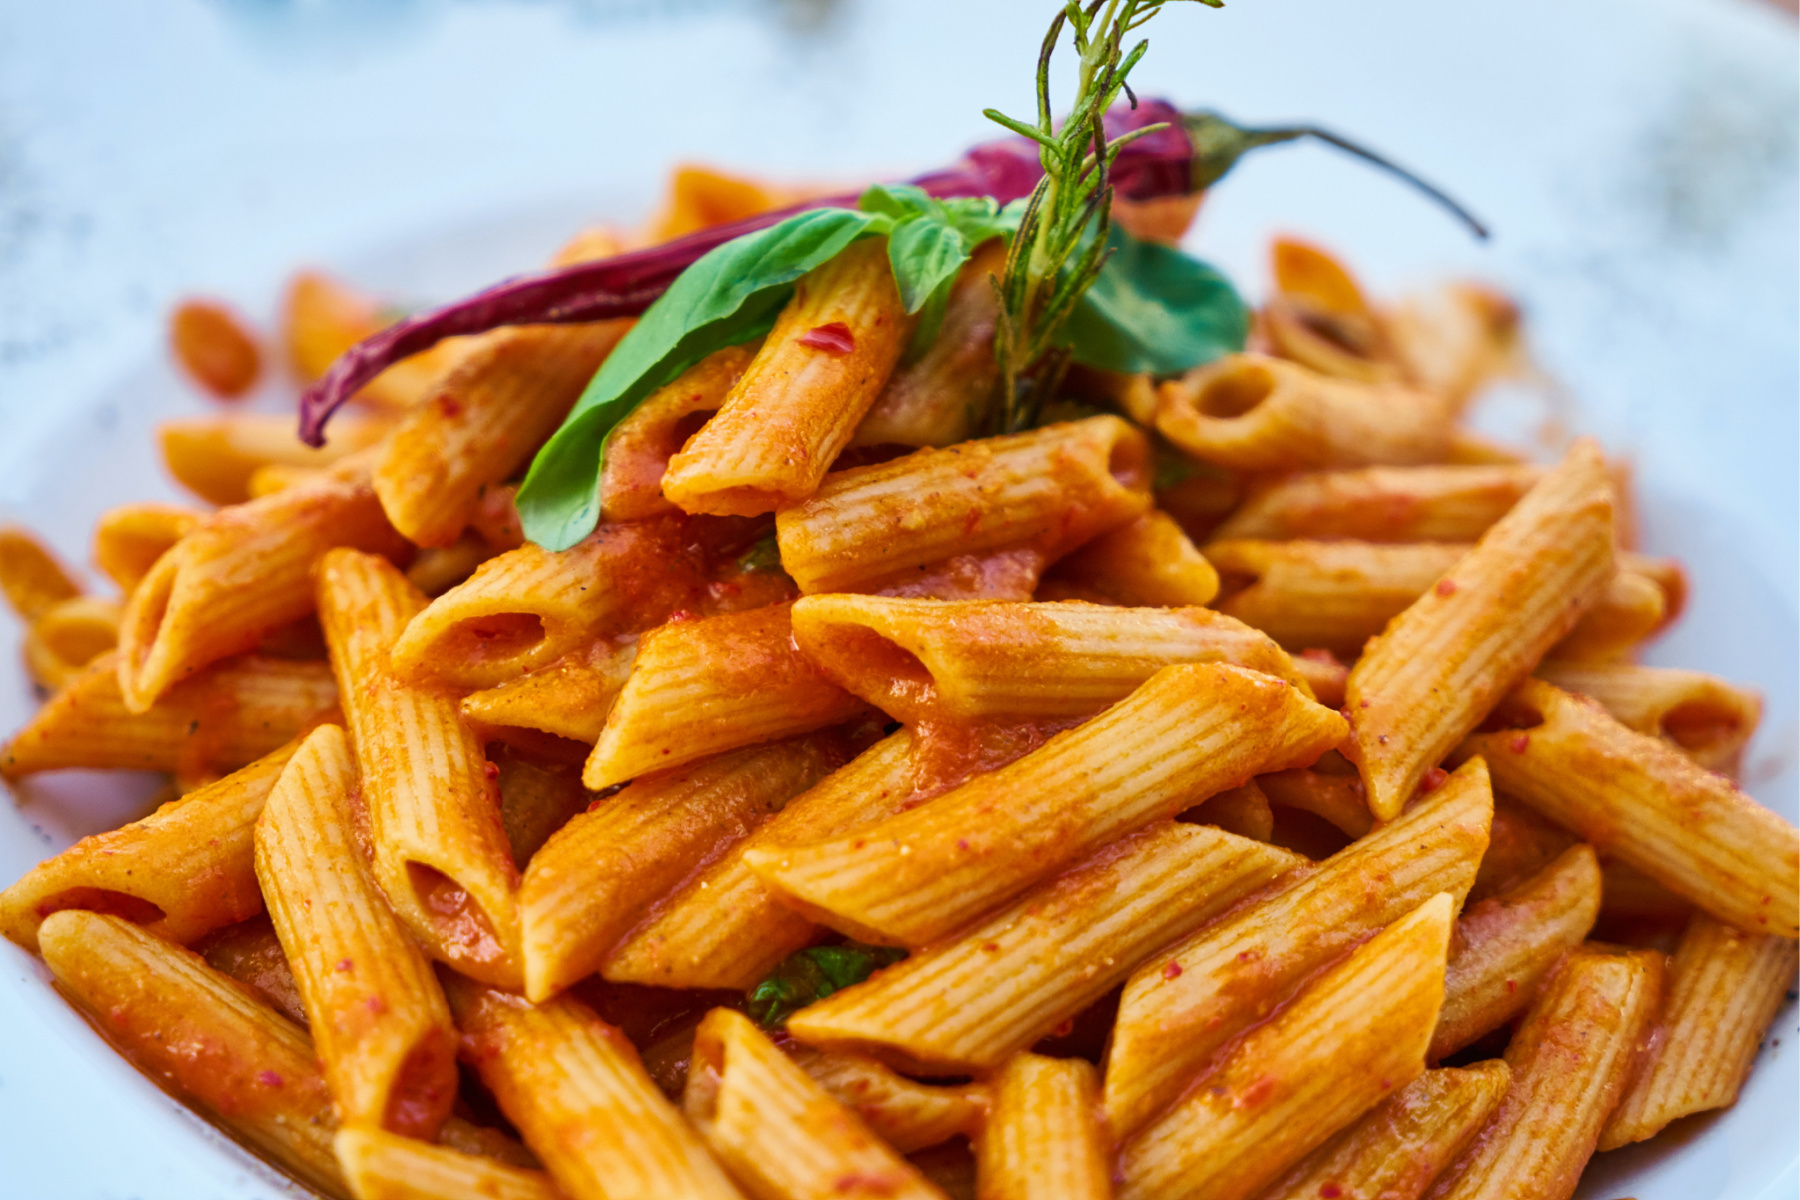 A plate of pasta with tomato sauce